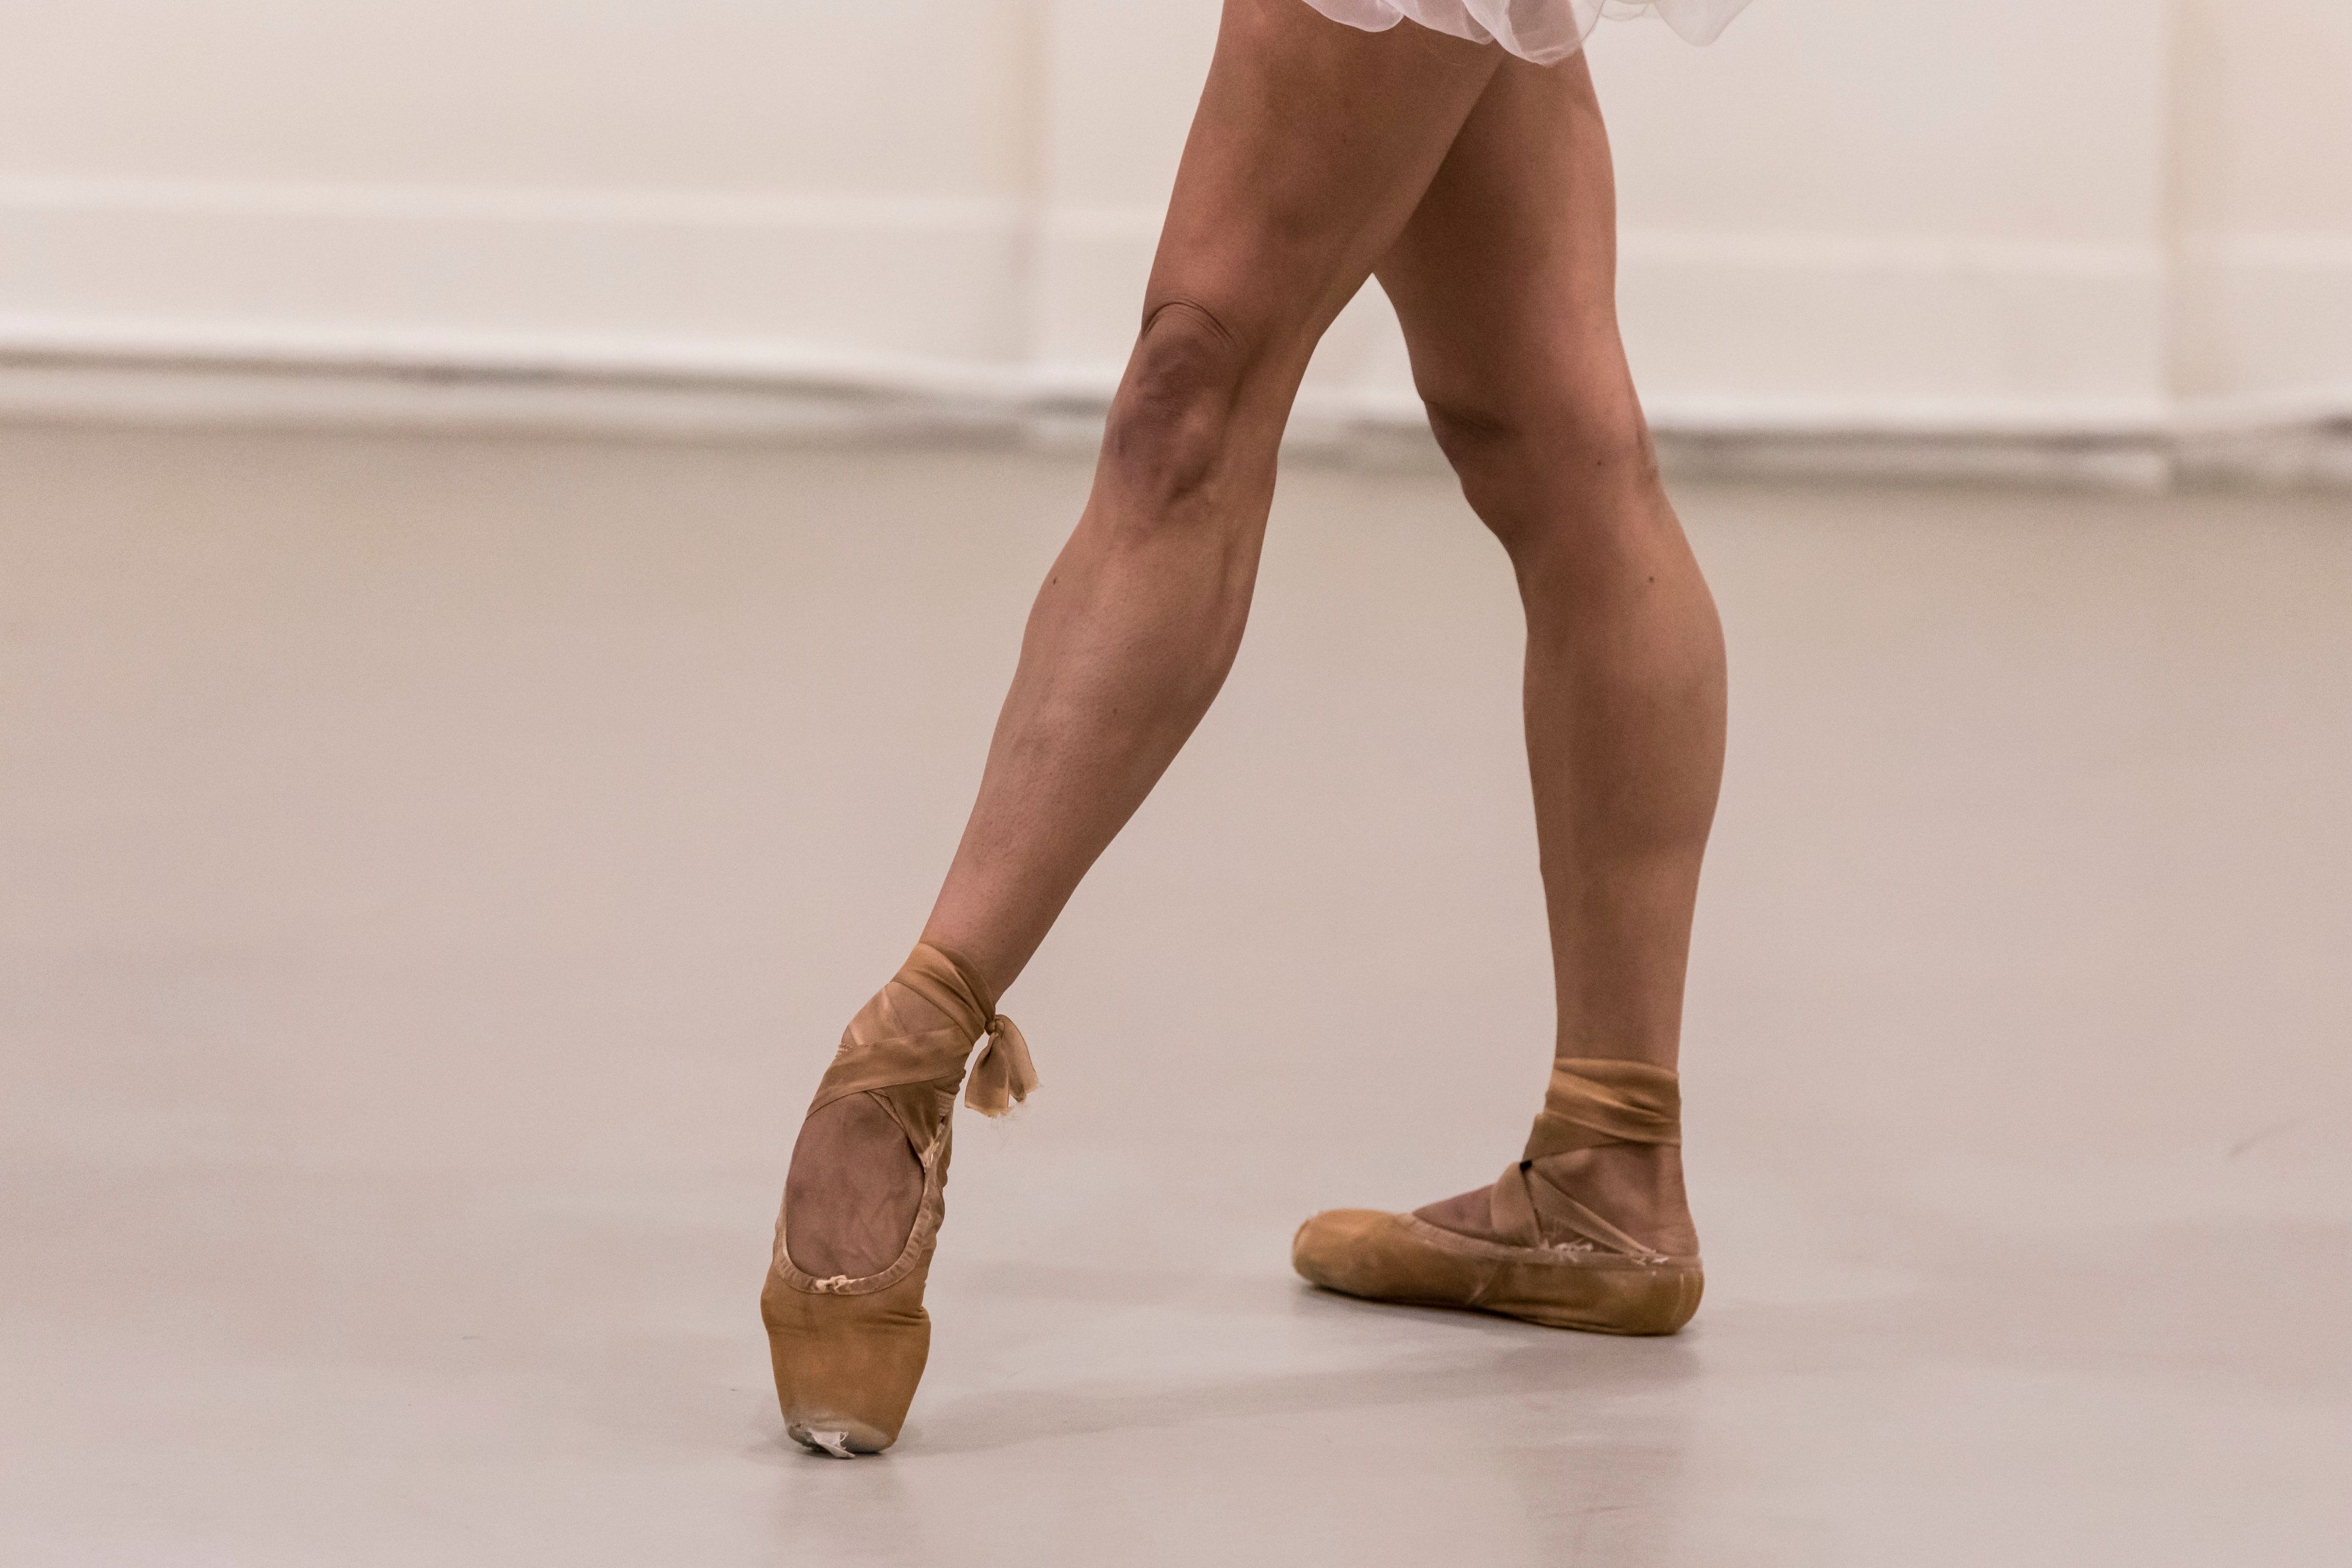 best ballet shoes for beginners